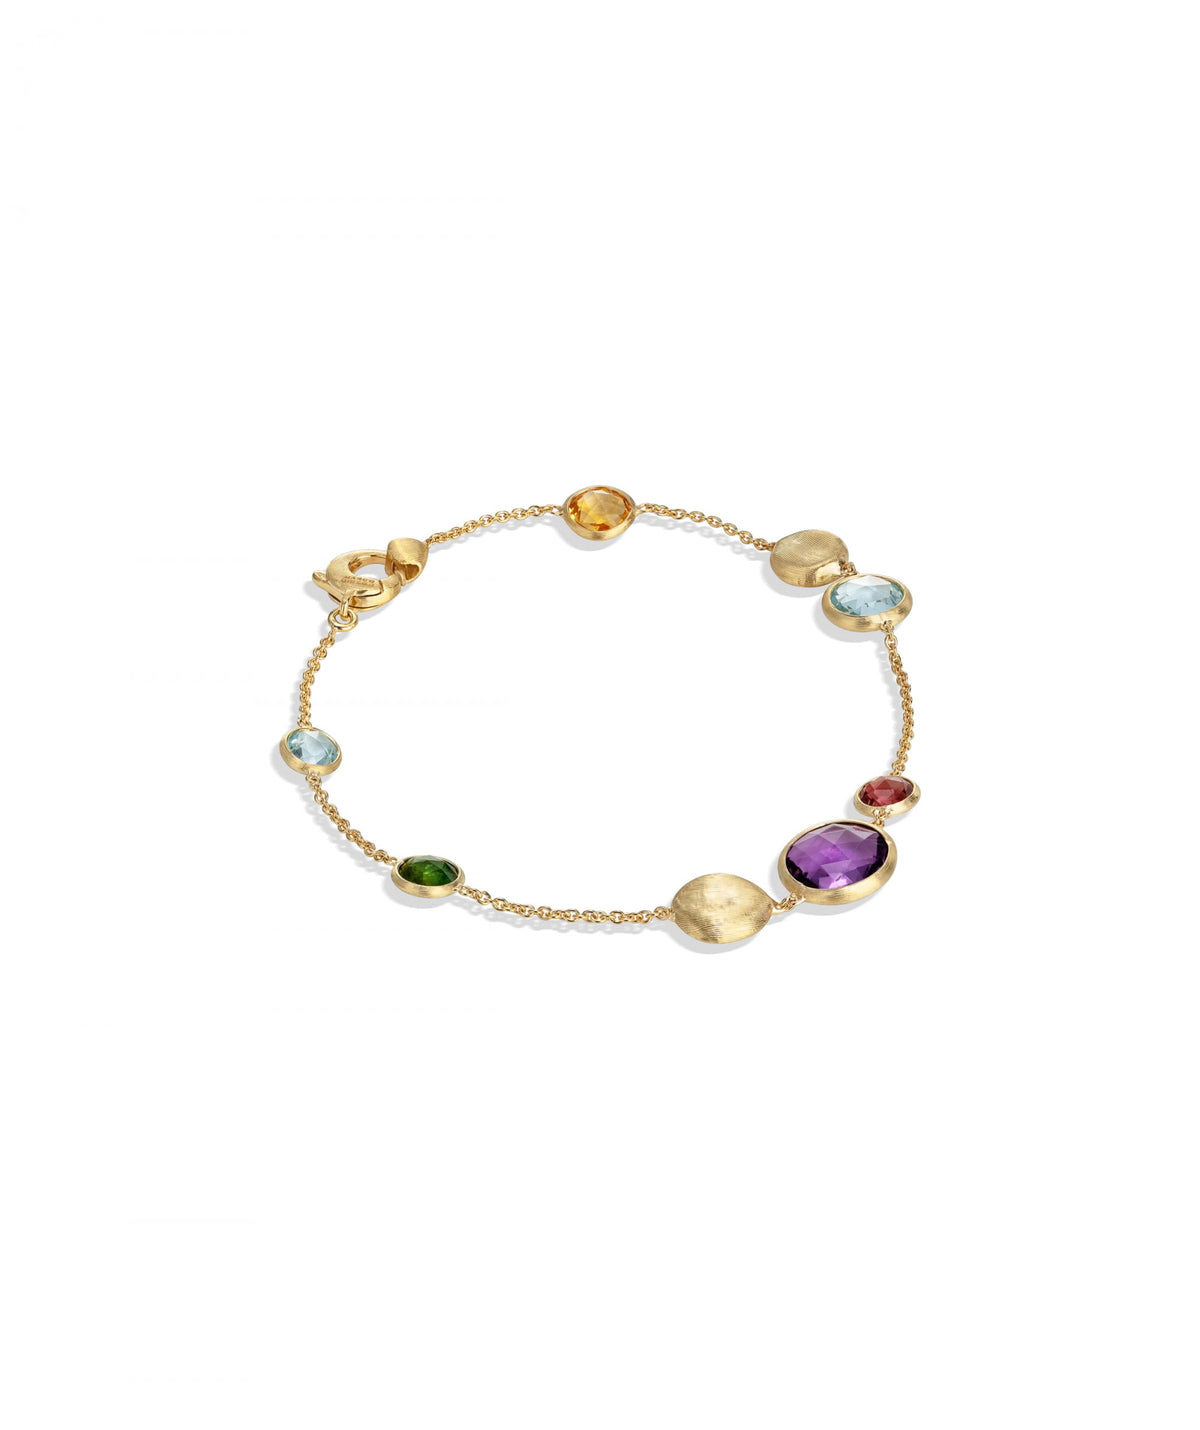 Jaipur Light Colour Bracelet in 18k Yellow Gold with Mixed Gemstones - Orsini Jewellers NZ